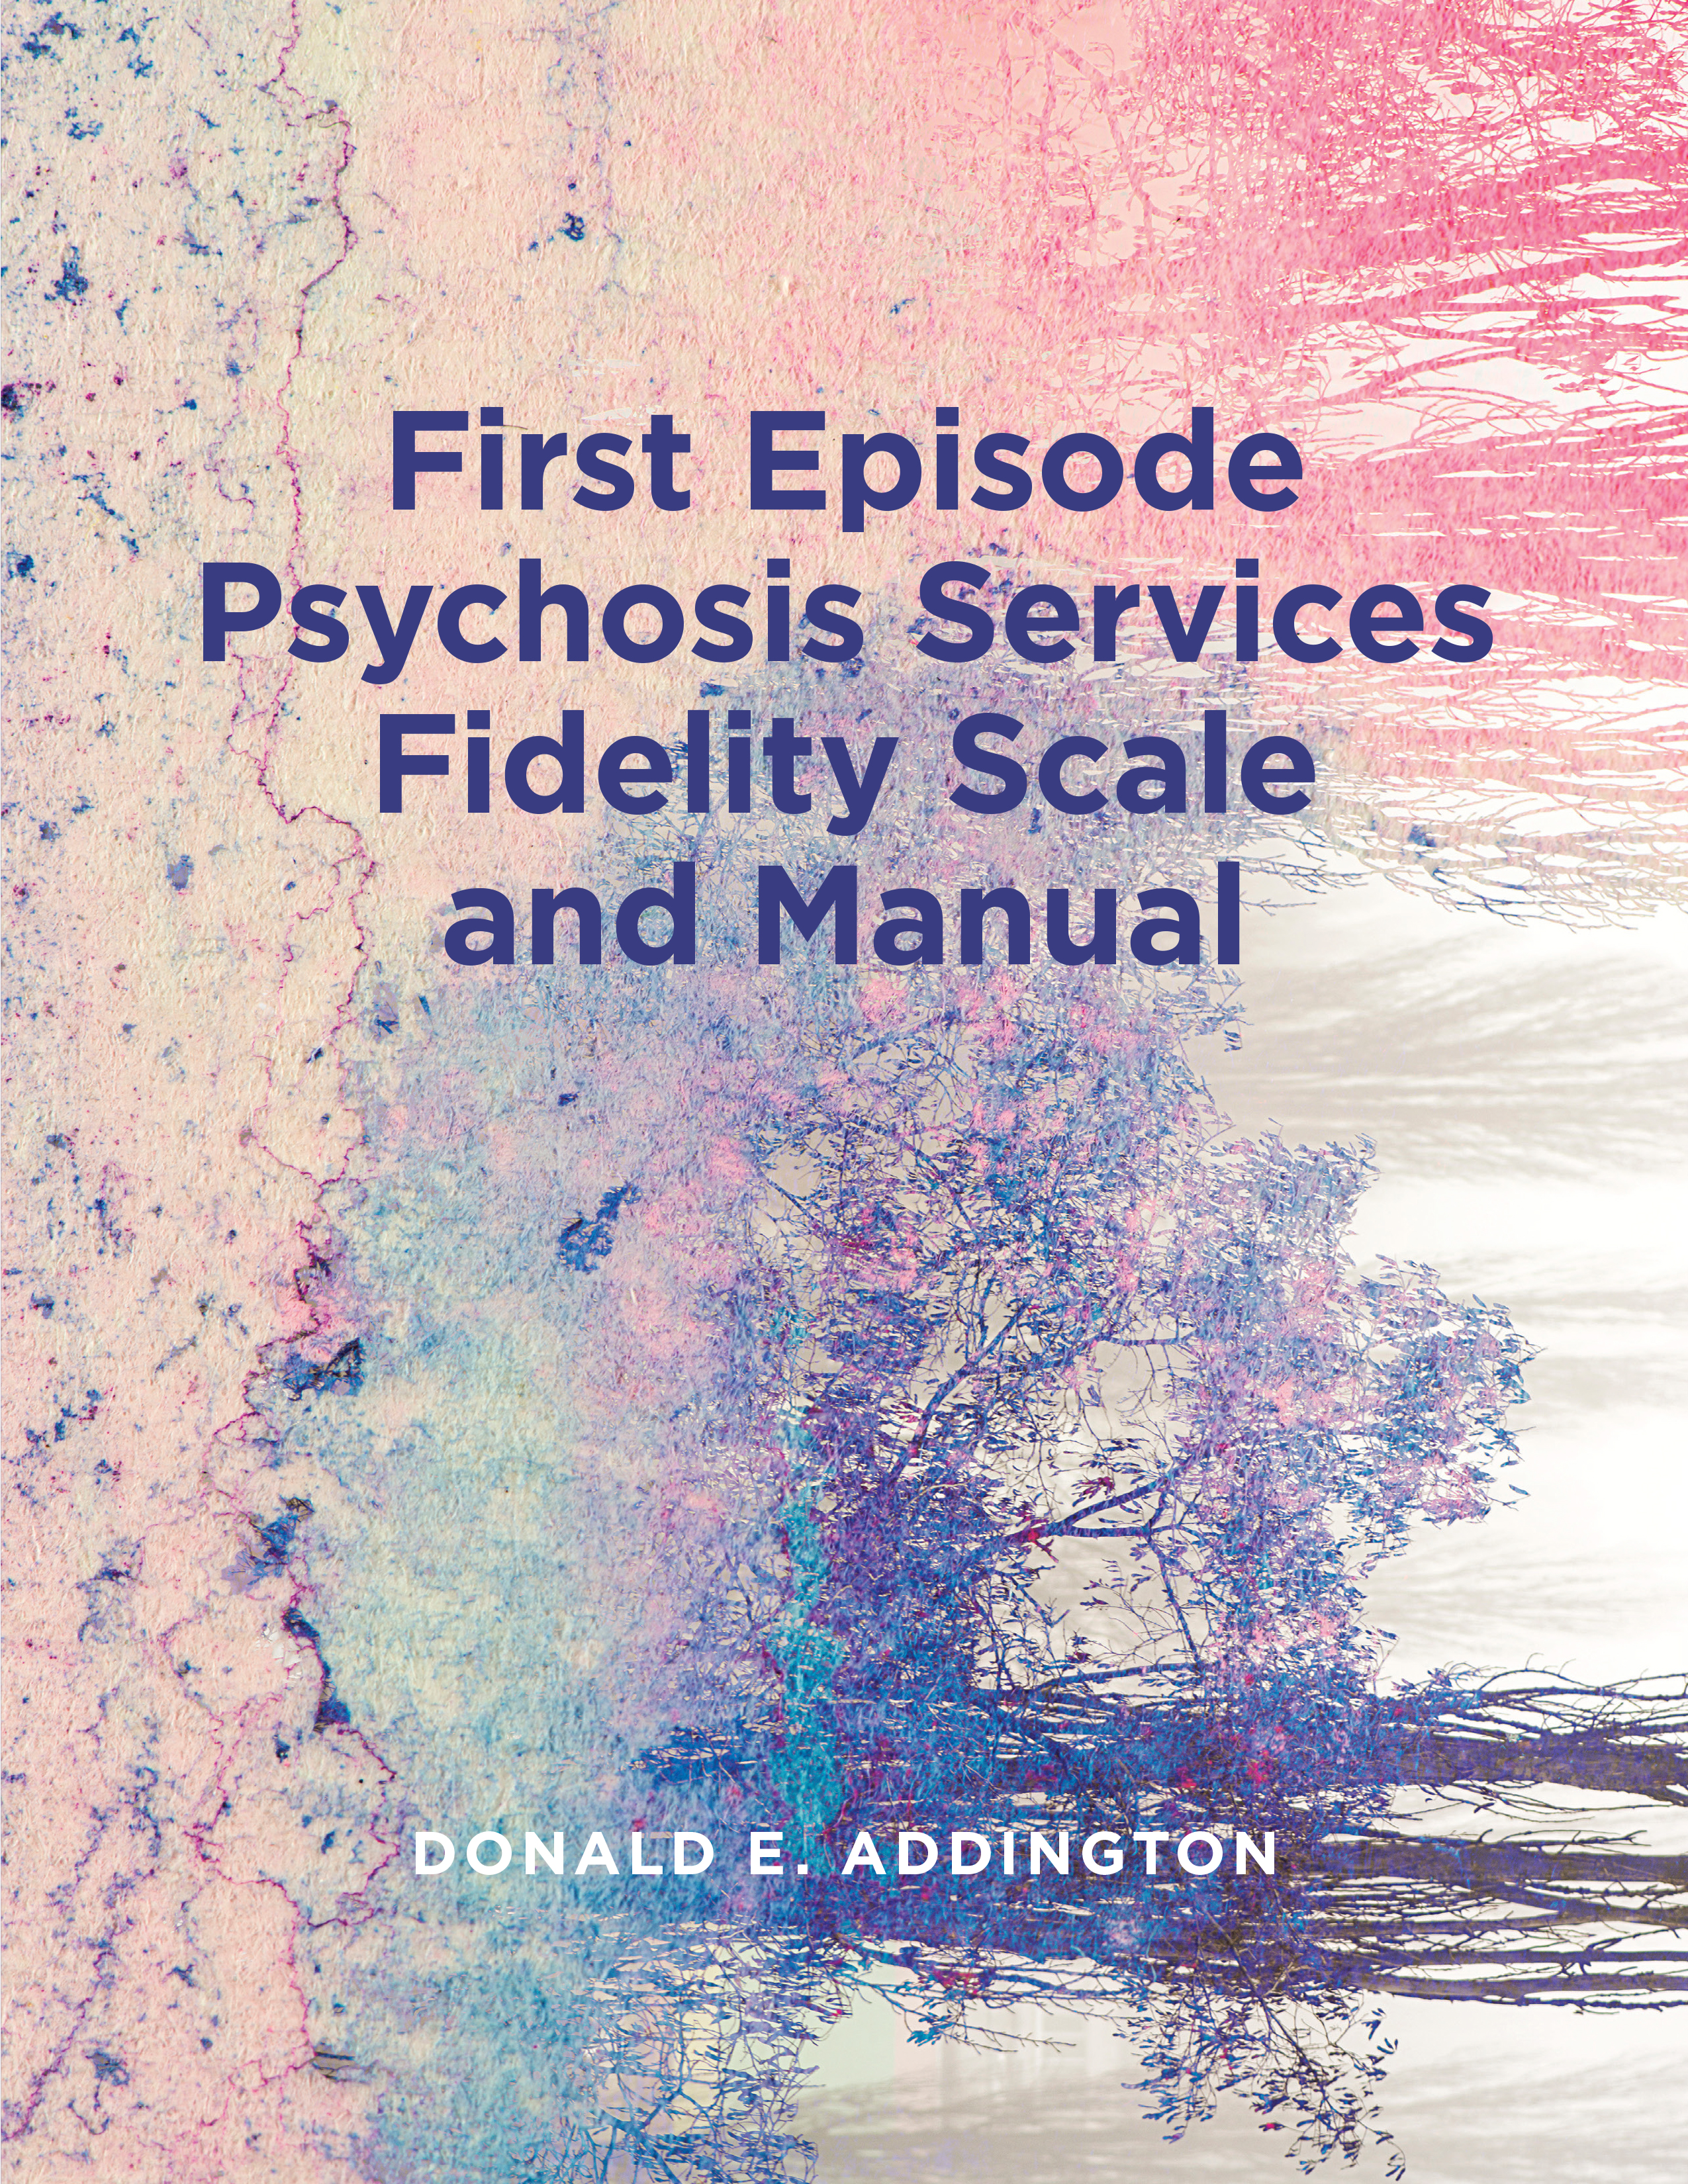 Book cover image for: First Episode Psychosis Services Fidelity Scale (FEPS-FS 1.0) and Manual